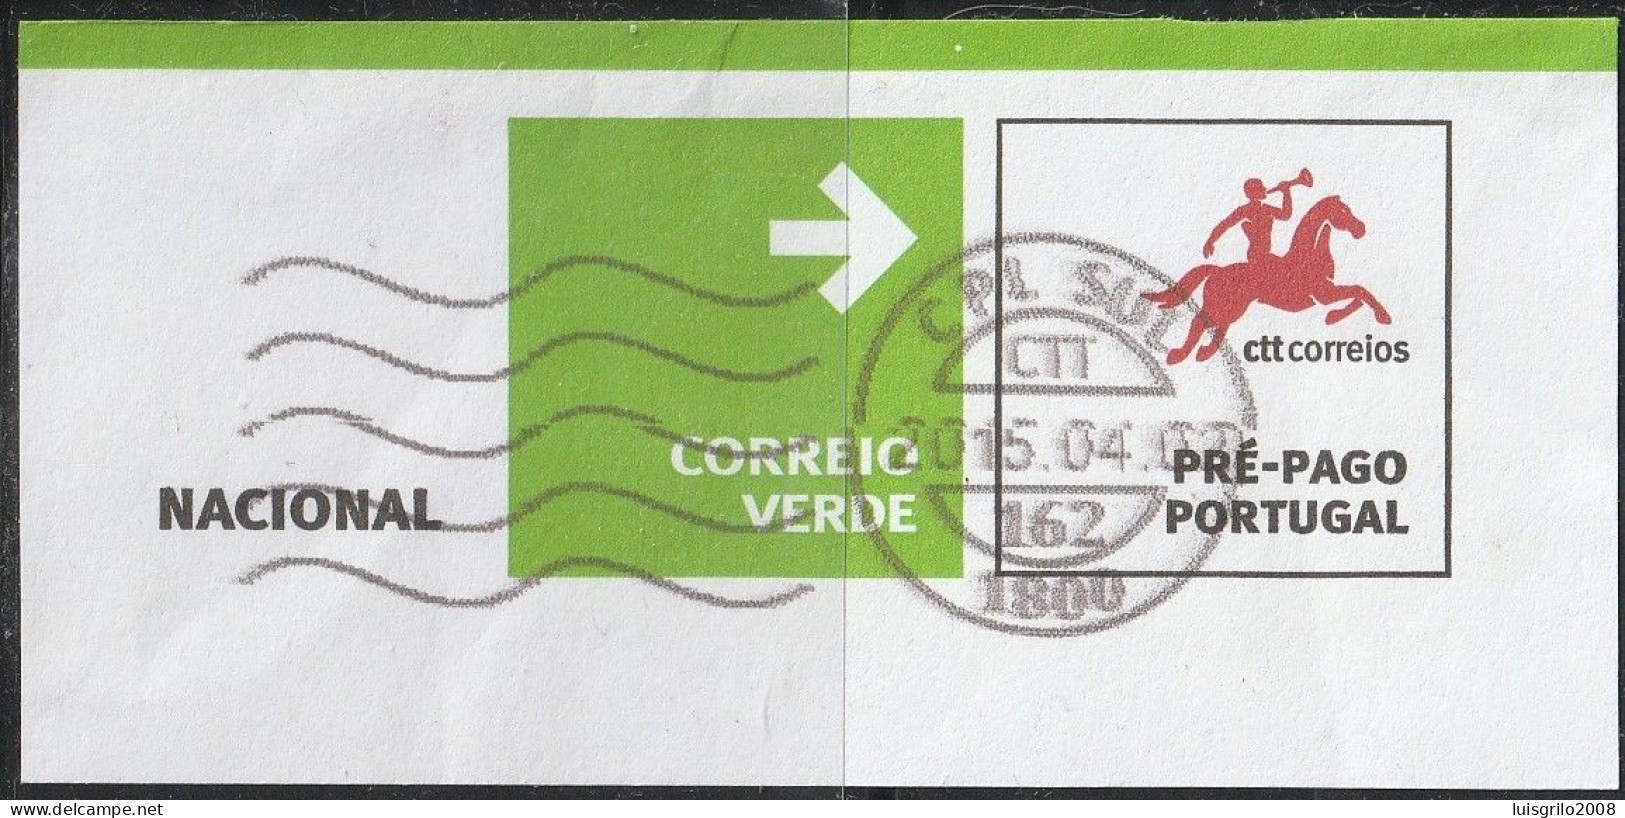 "VERY RARE . RED KNIGHT" Fragment - Postmark CPL SUL -|- Correio Verde. Pré-Pago / Prepaid Green Mail - Used Stamps